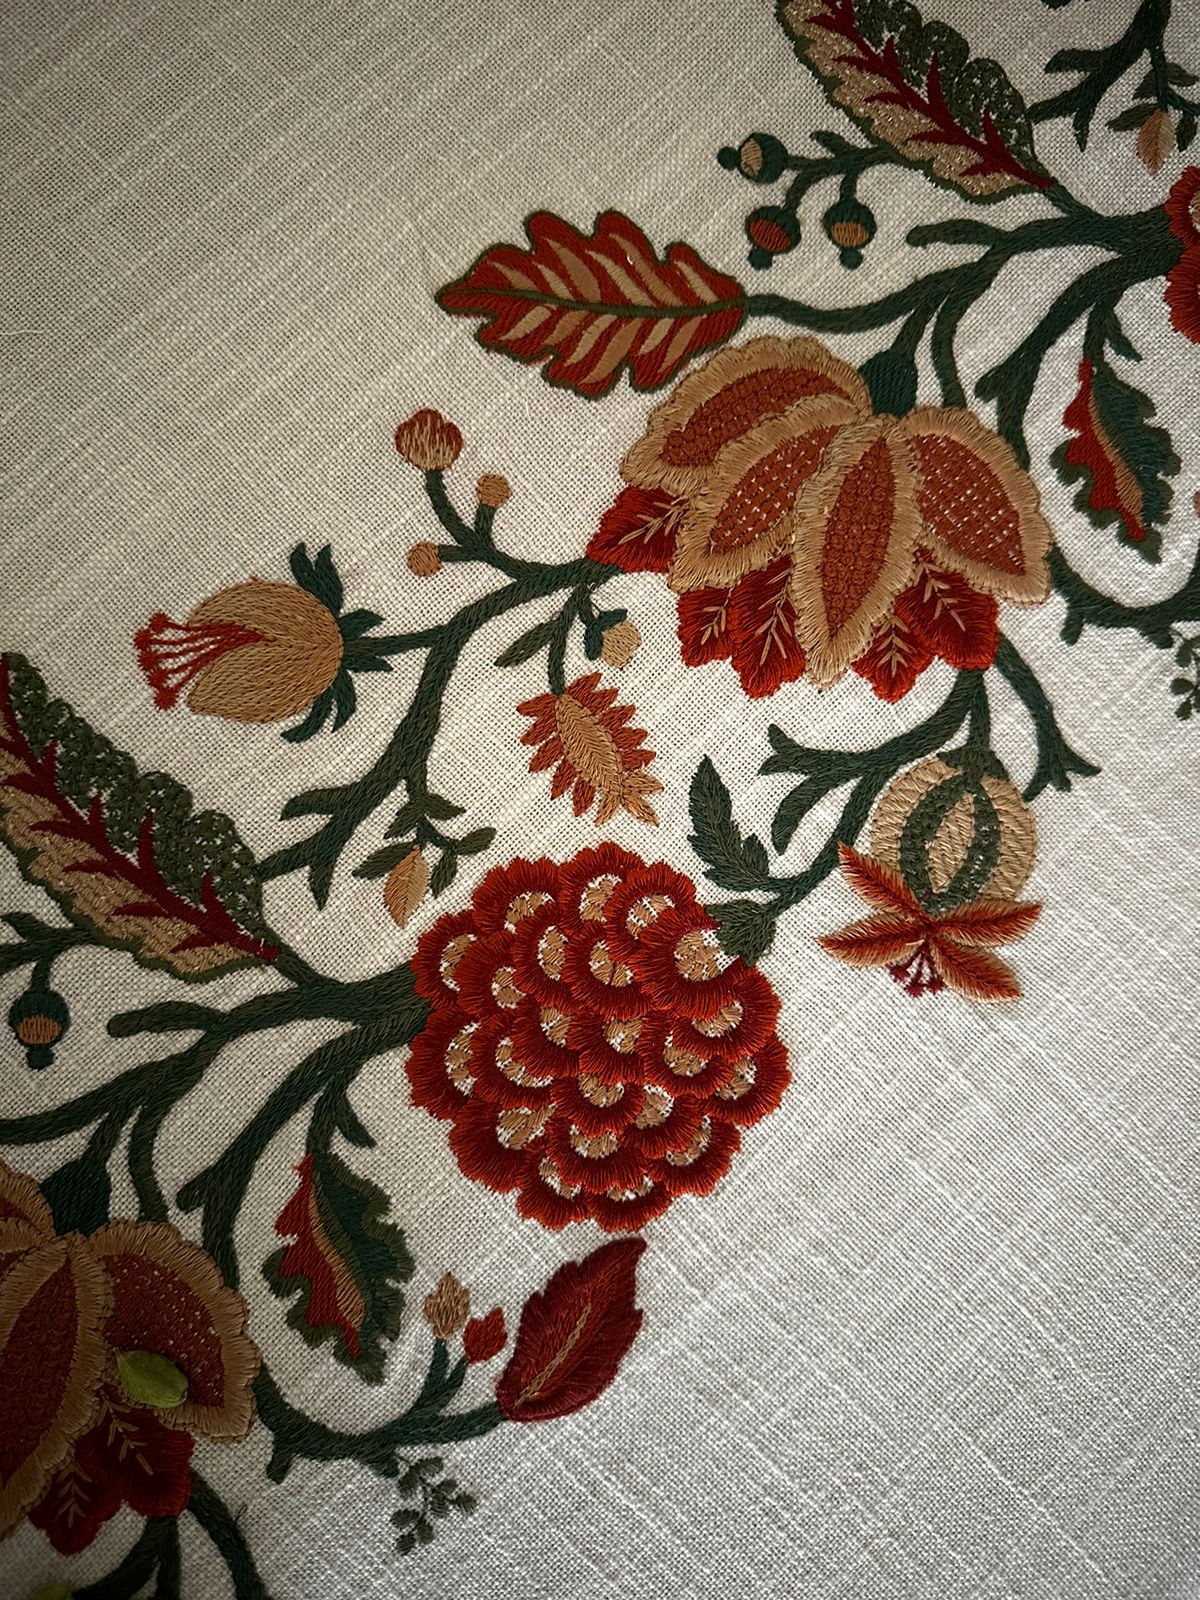 SAND FLORAL RUST EMBROIDERY TABLE RUNNER WITH TASSLES